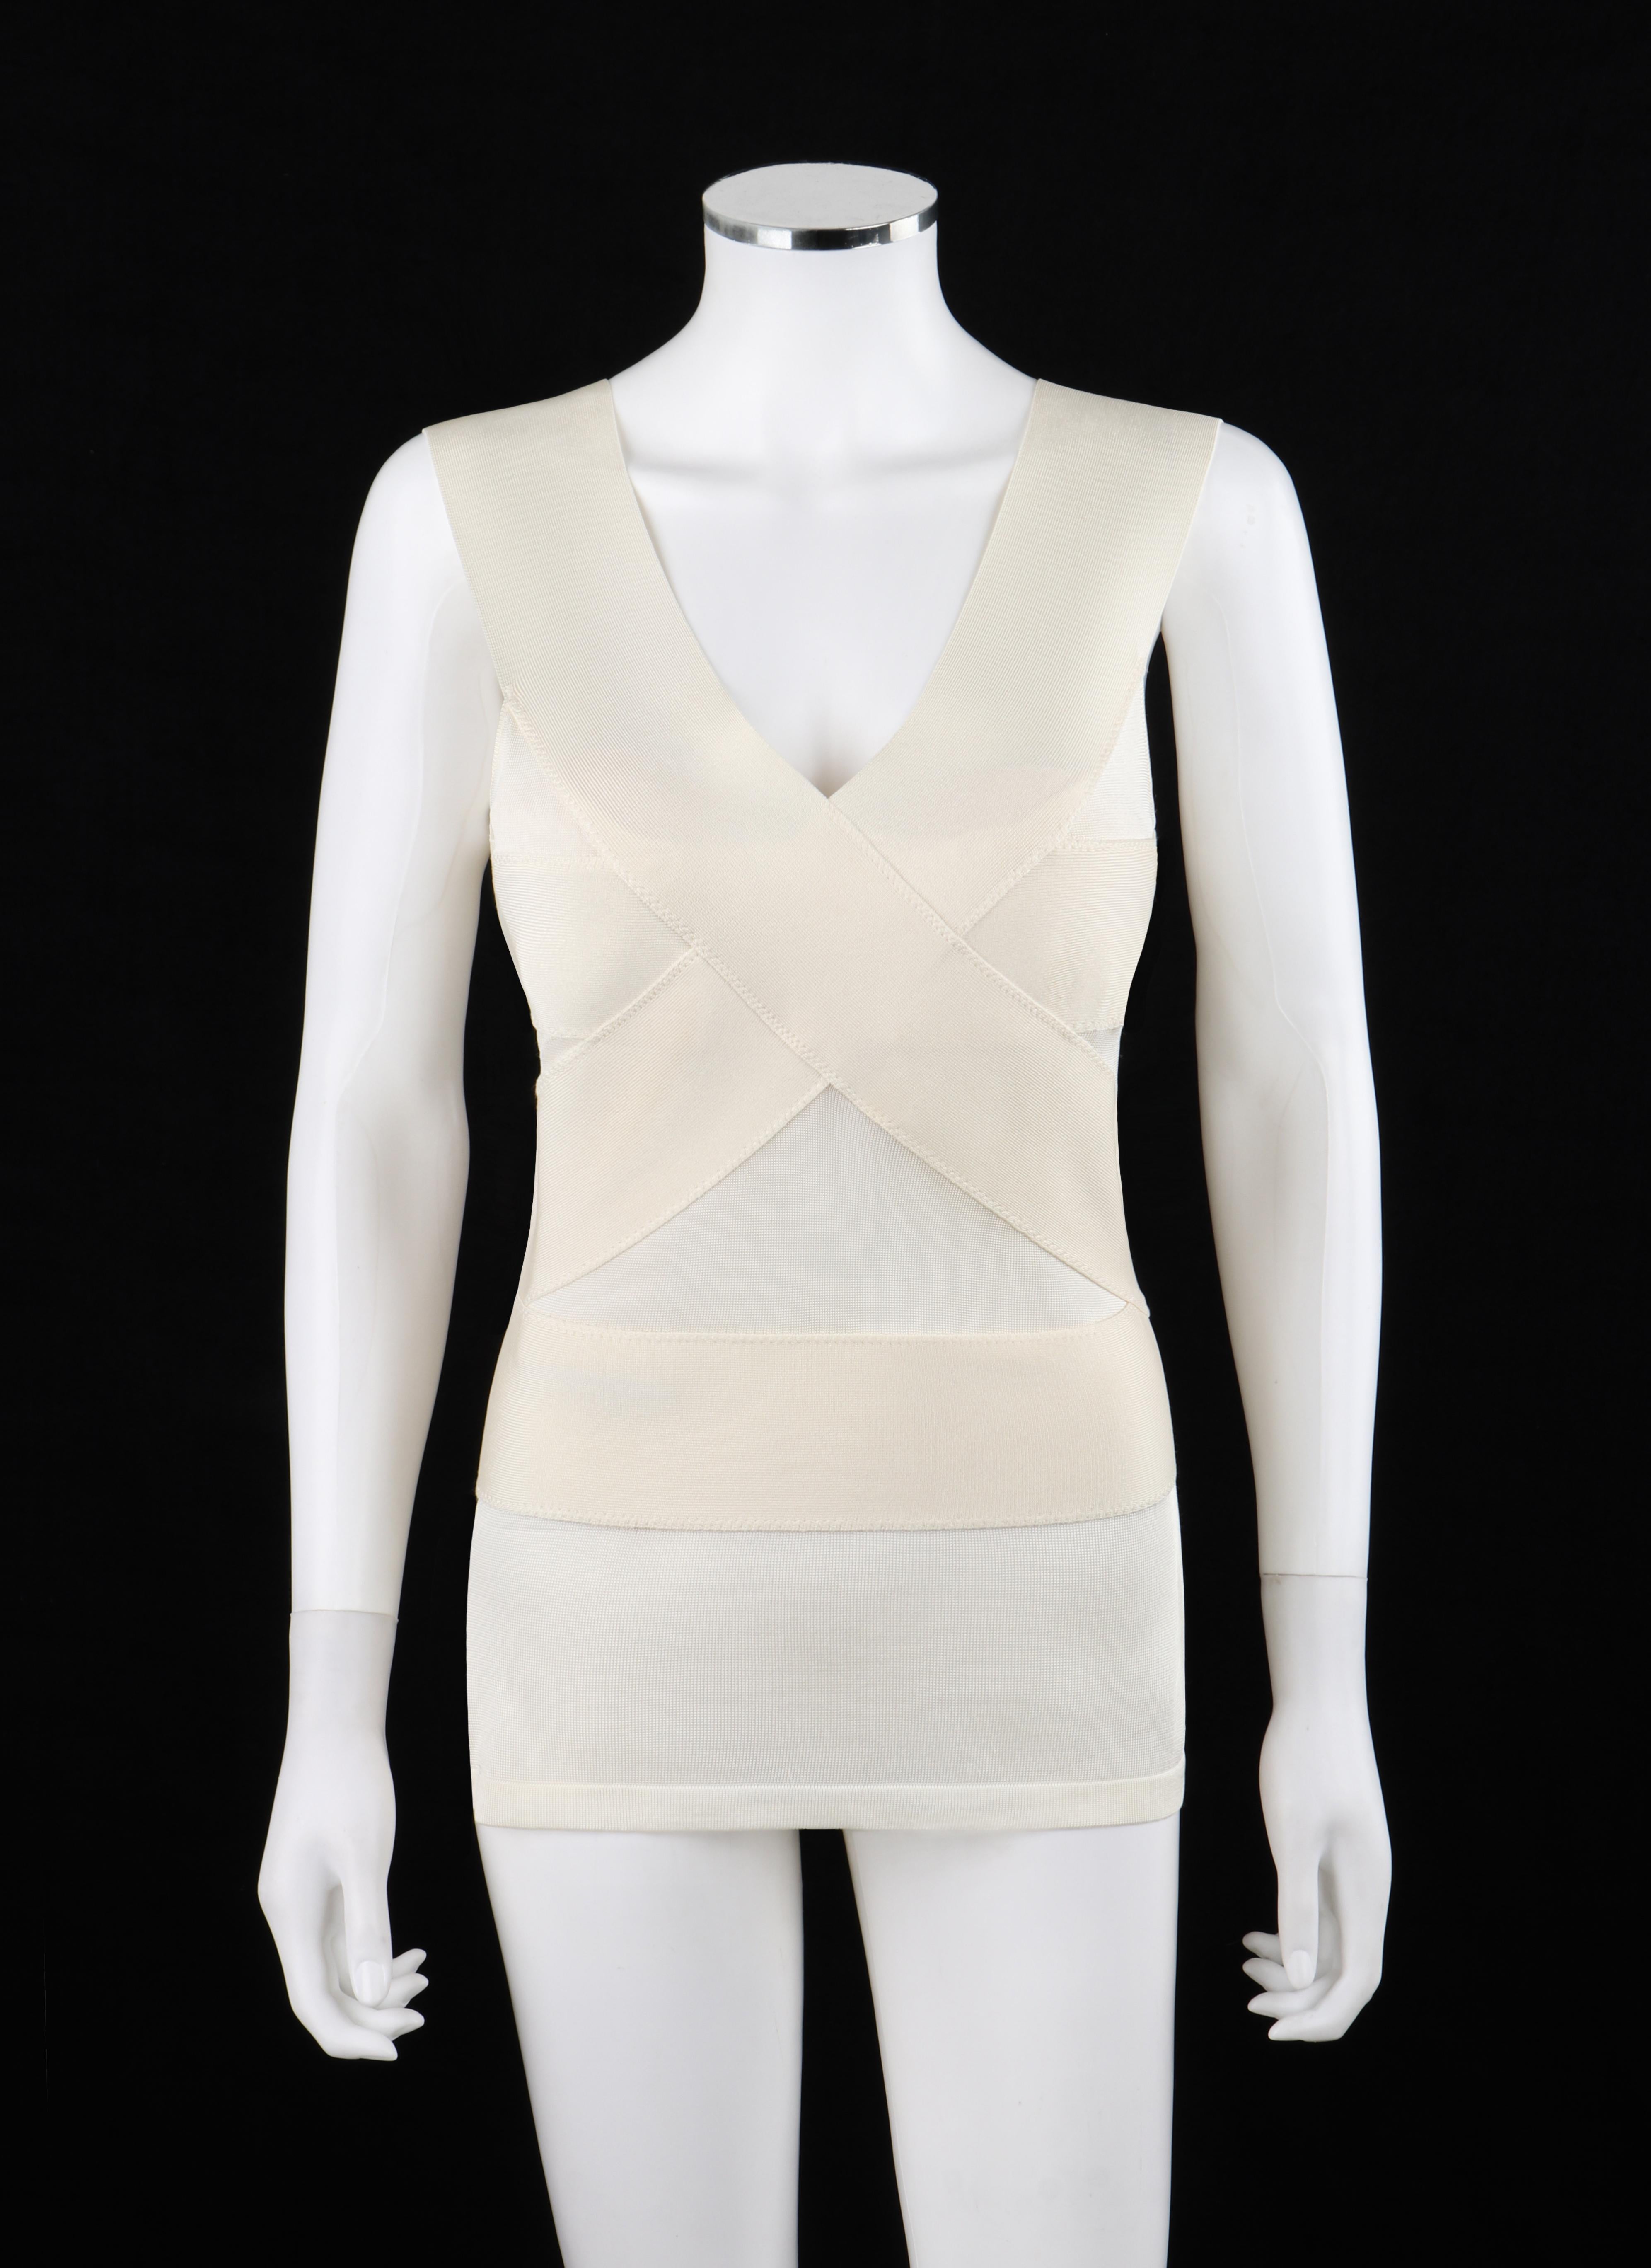 Brand / Manufacturer: Alexander McQueen
Circa: 2007
Designer: Alexander McQueen
Style: Sleeveless Top
Color(s): Shades of ivory,
Lined: No
Marked Fabric Content: 